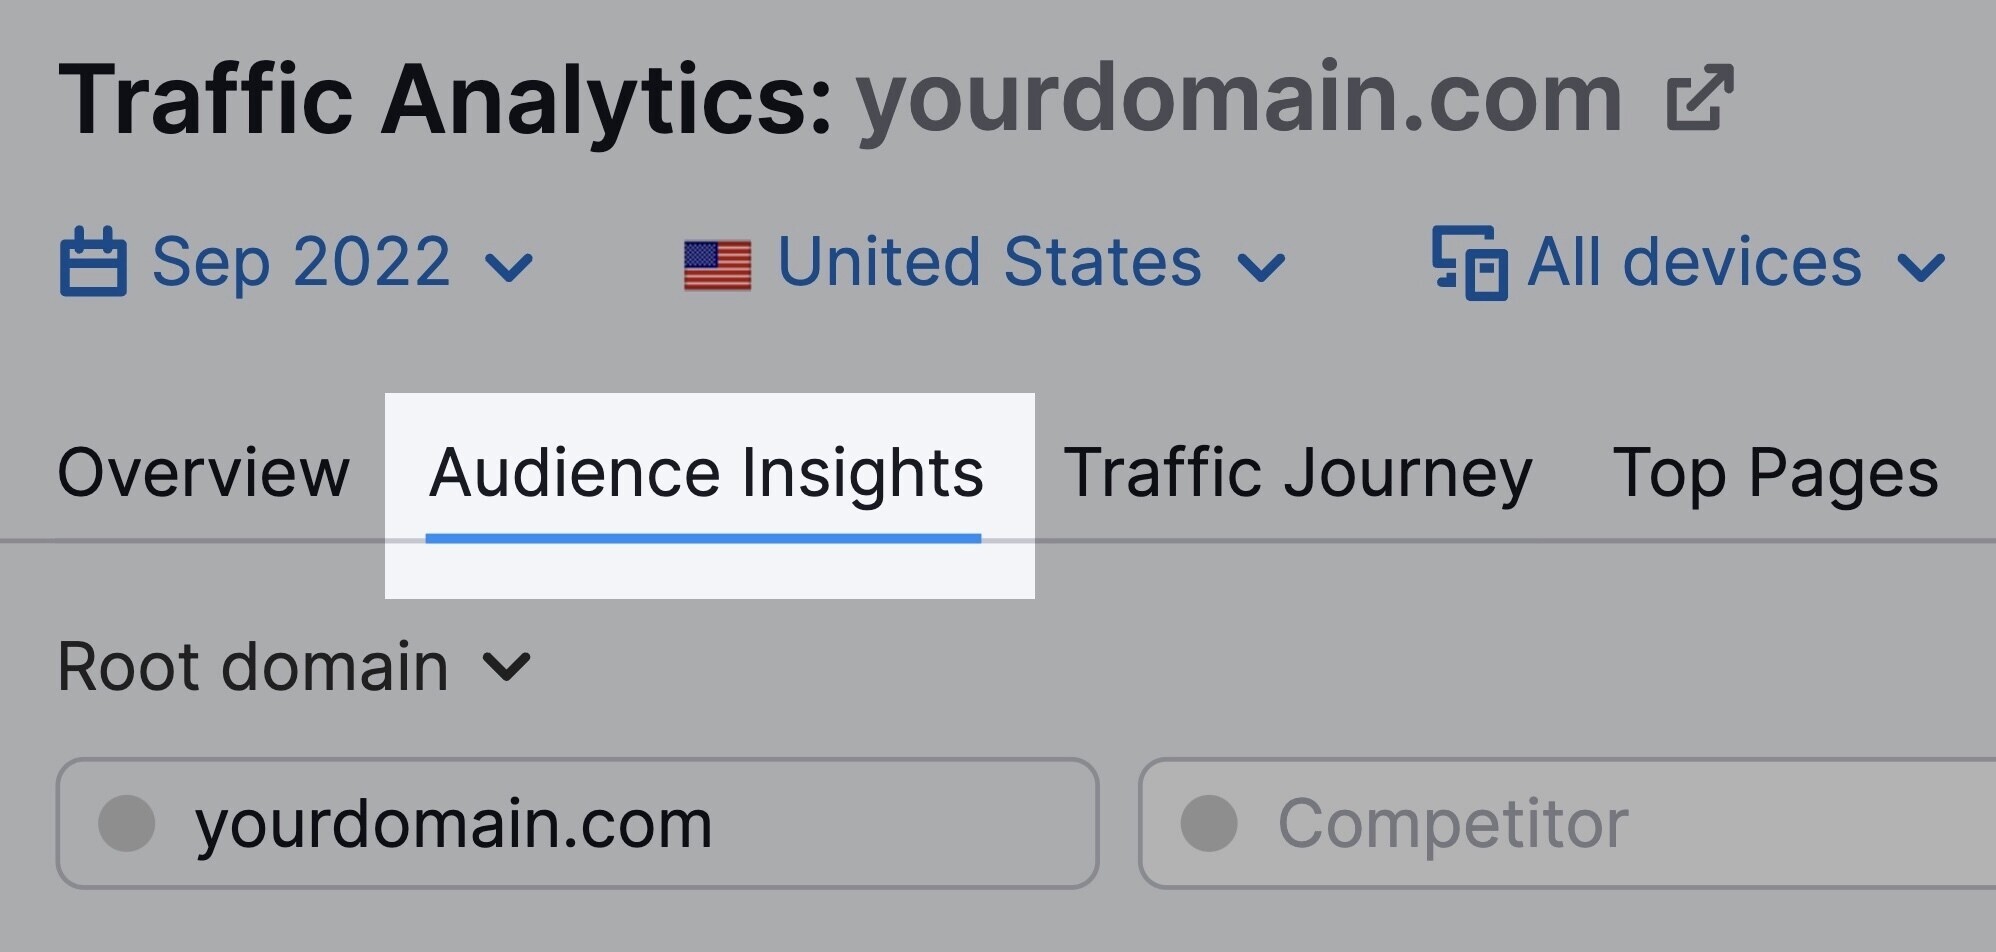 audience insights in traffic analytics